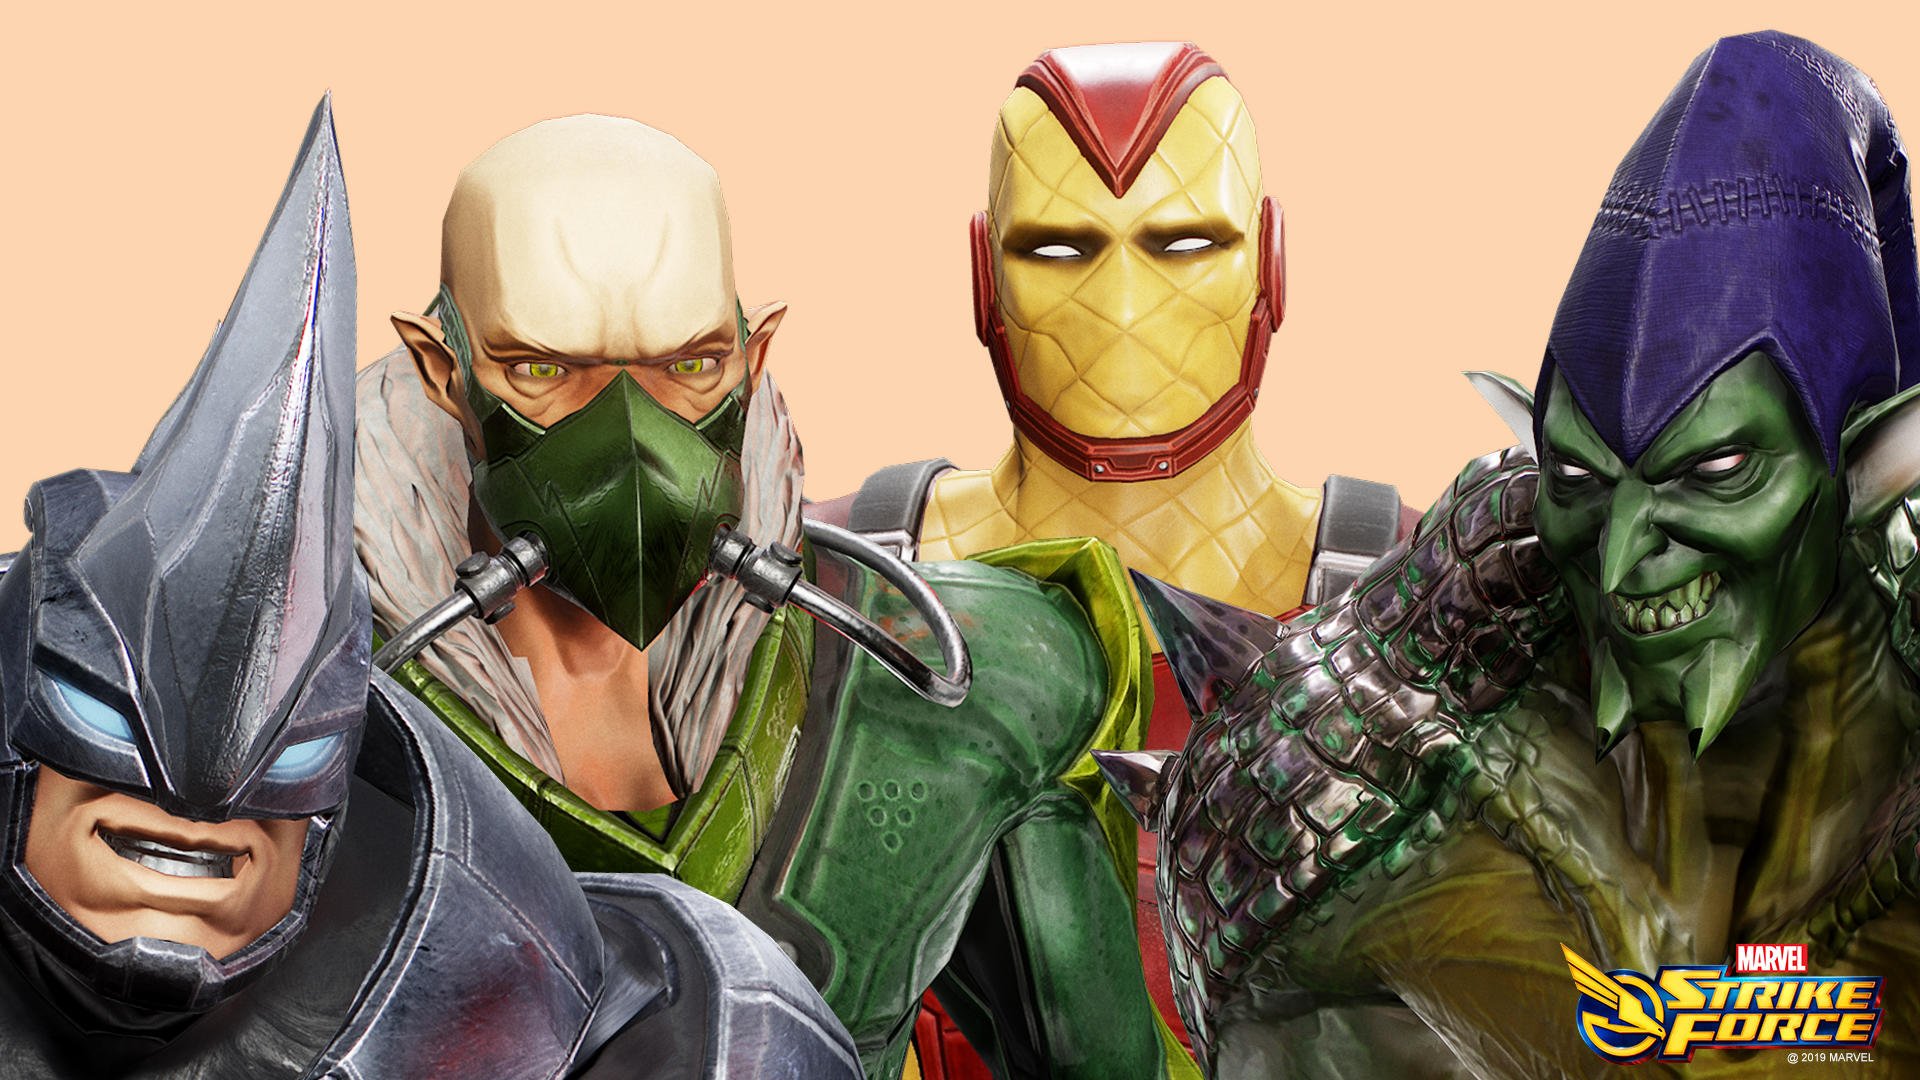 Marvel Strike Force on Twitter "Me and the boys getting